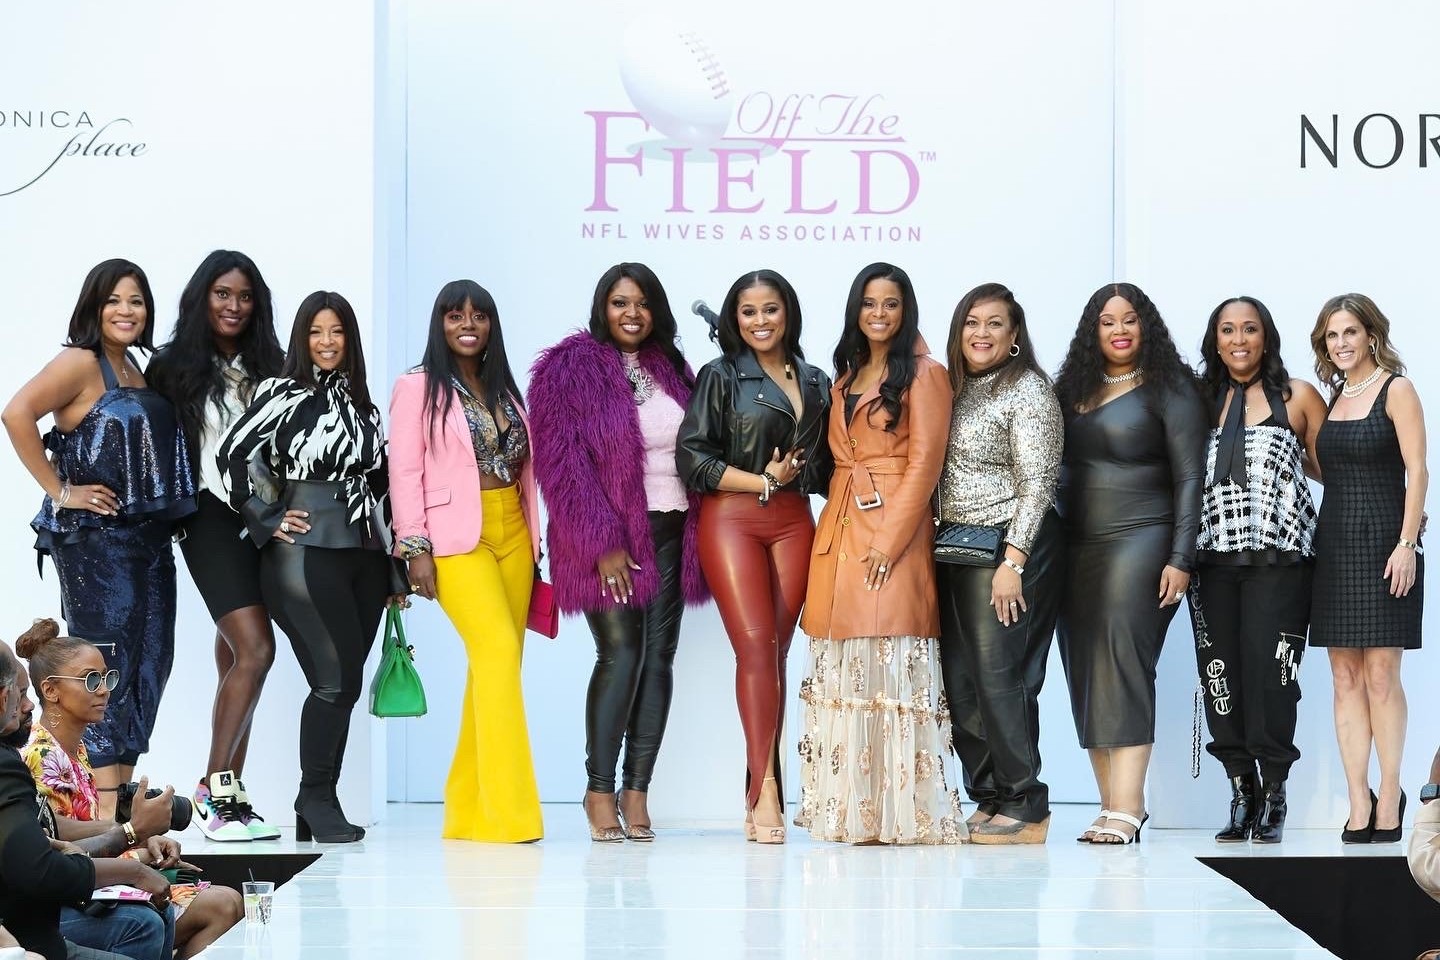 Off The Field NFL Wives Association Annual Conference